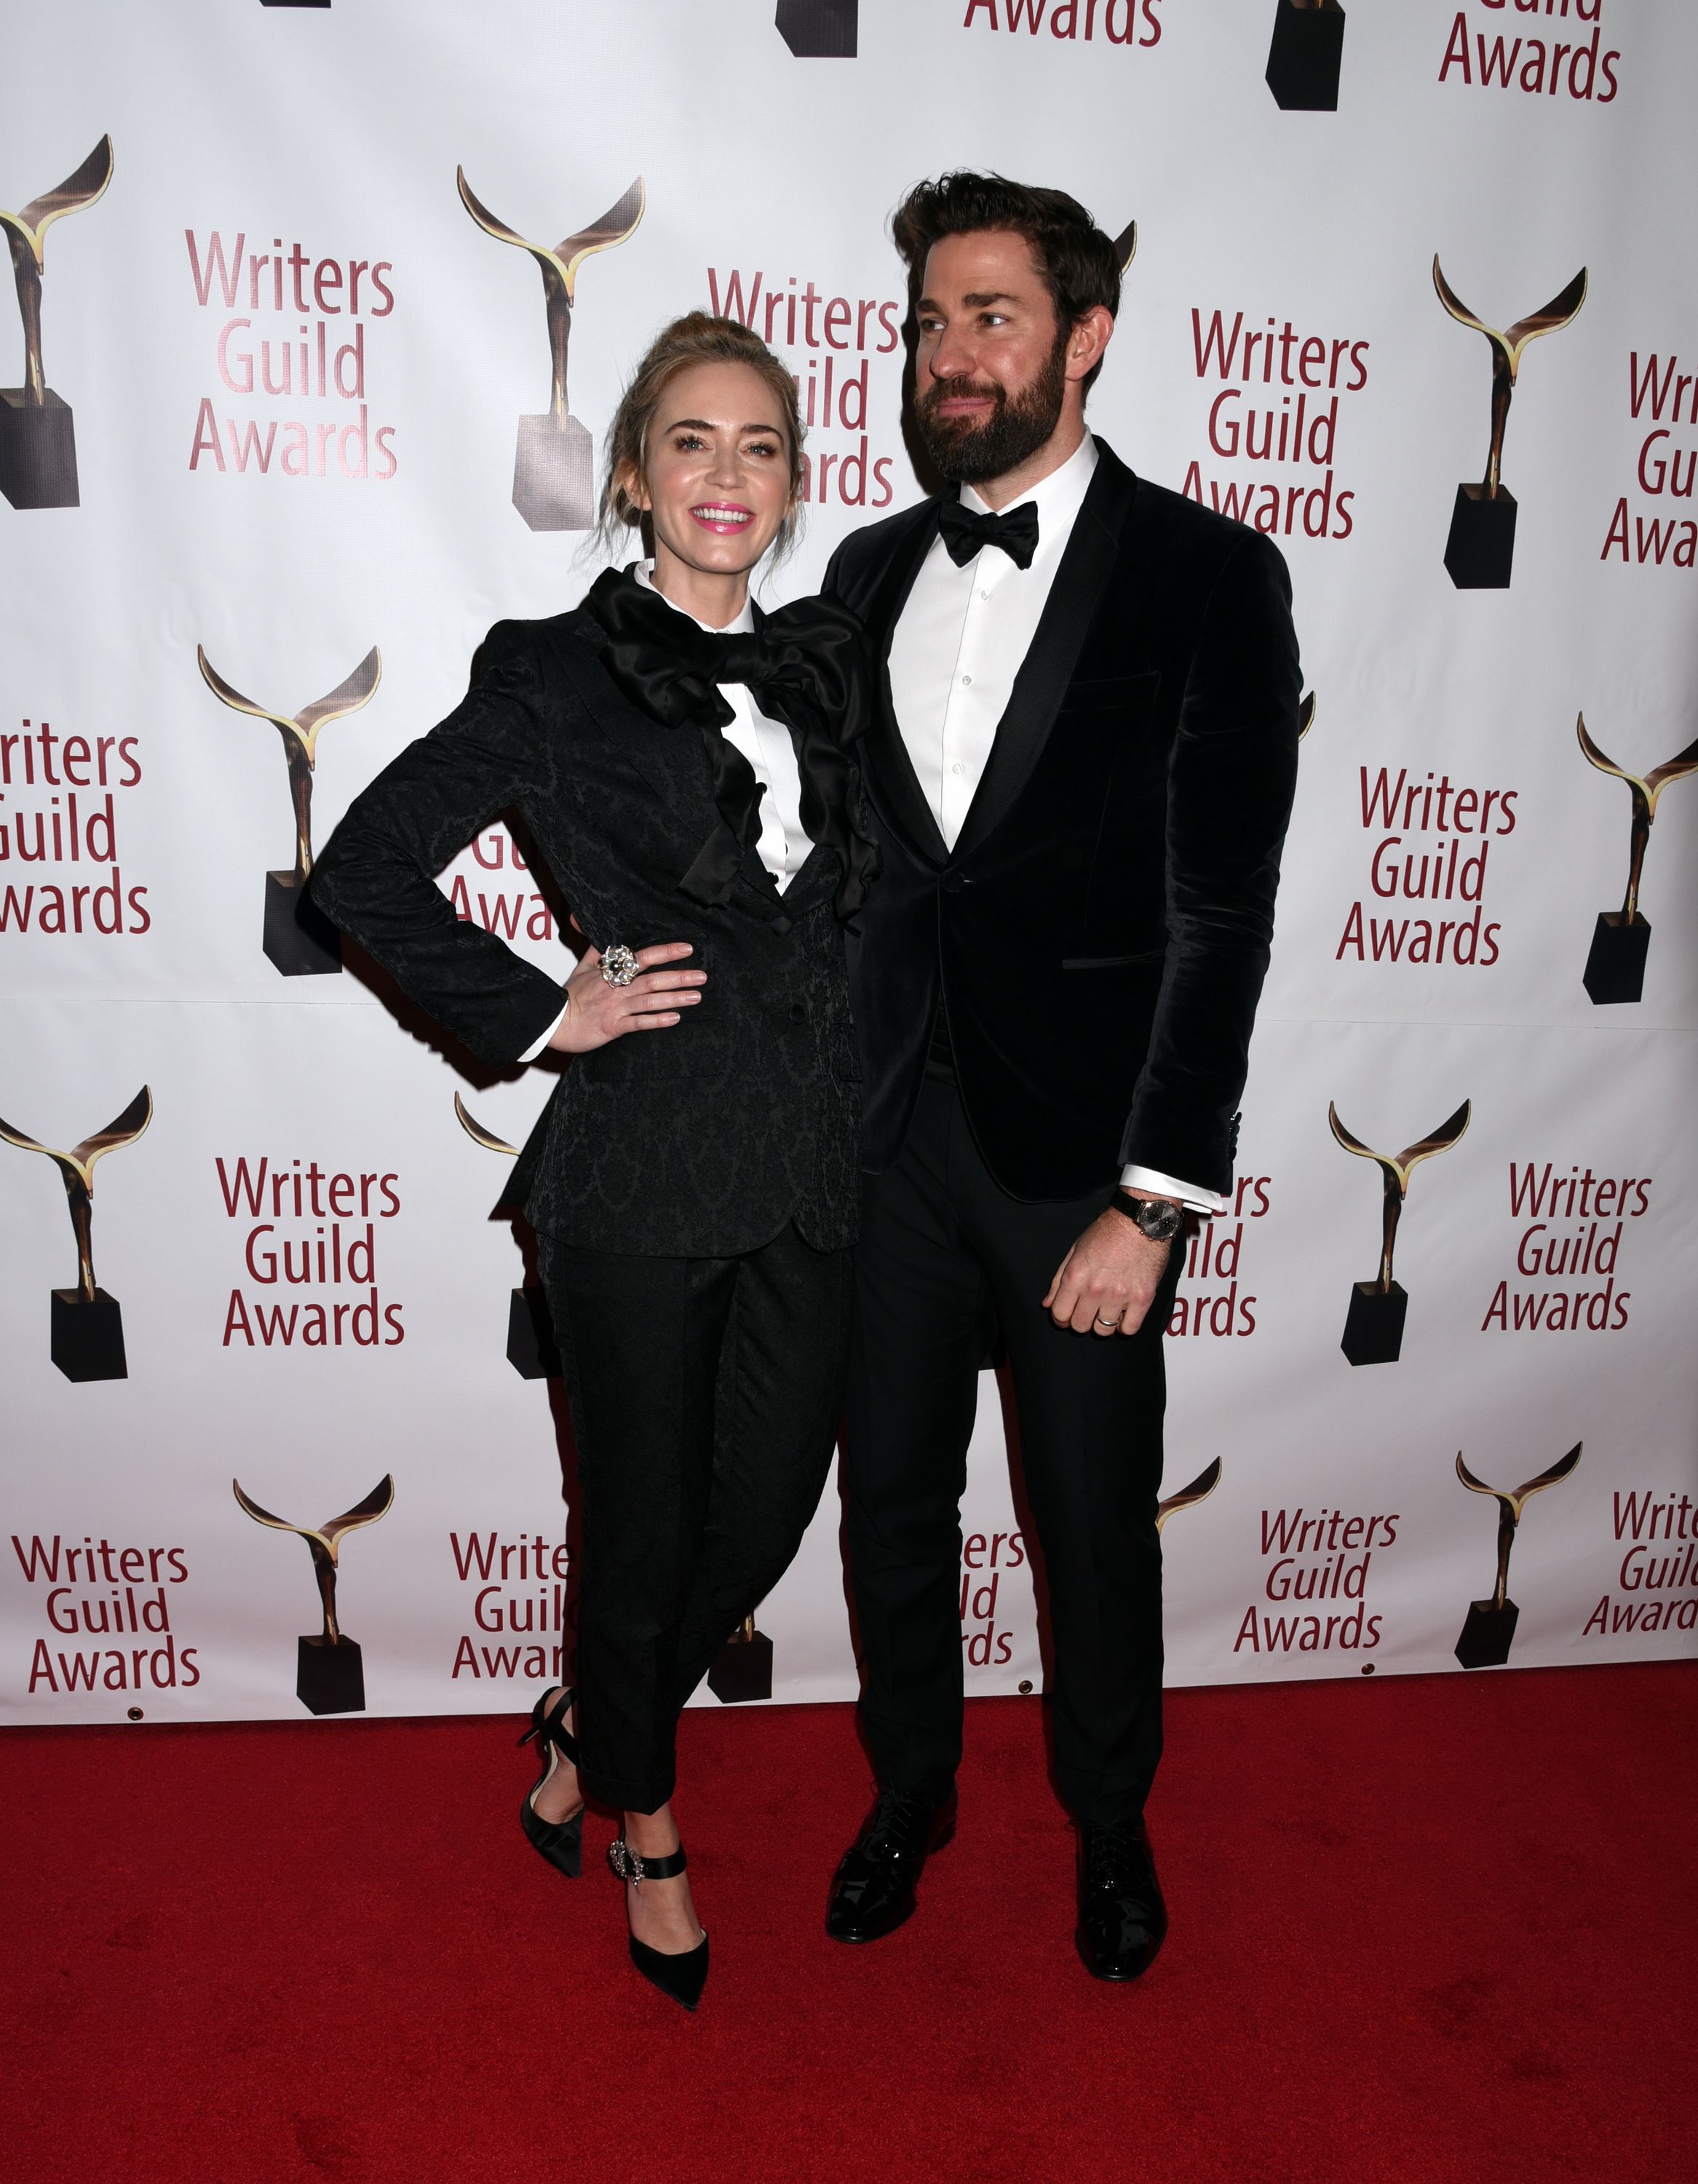 2019-02-17-71st-Annual-Writers-Guild-Awards-131.jpg